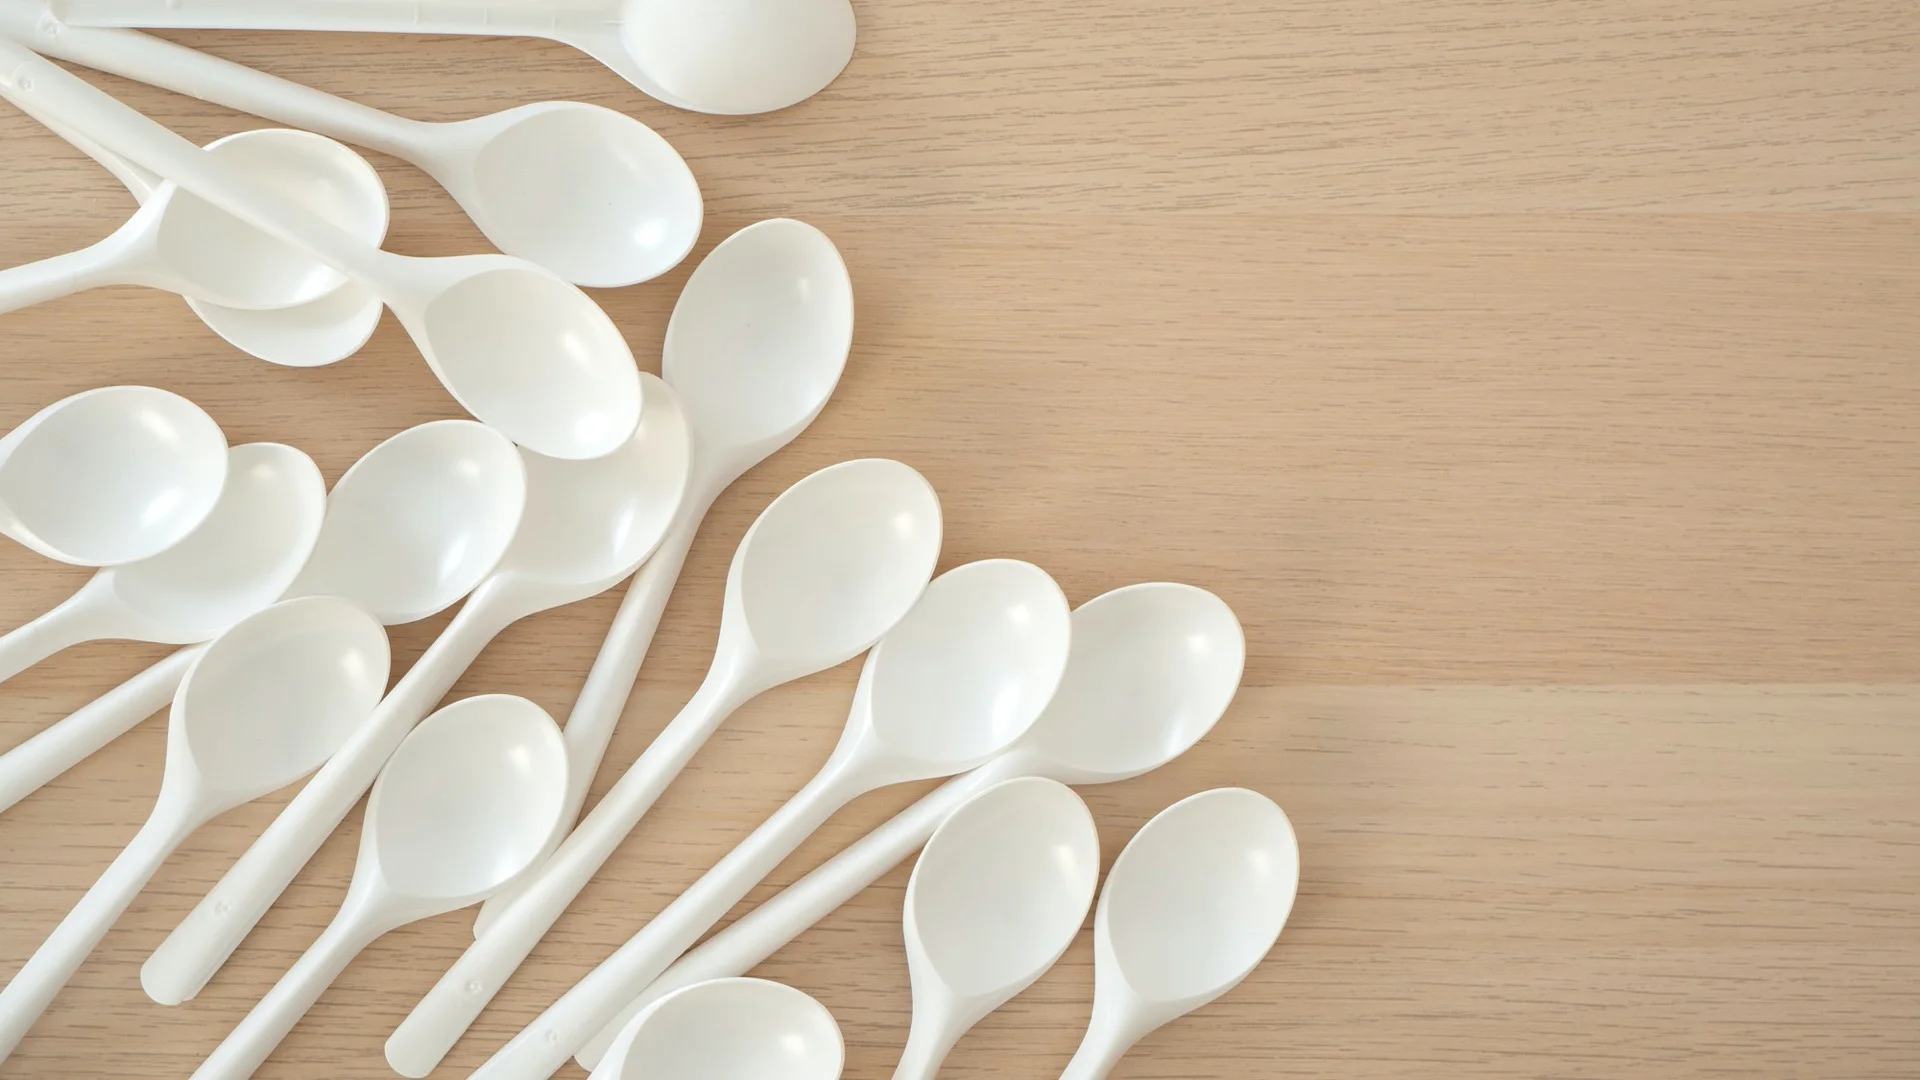 Converting 12 Tablespoons to Cups